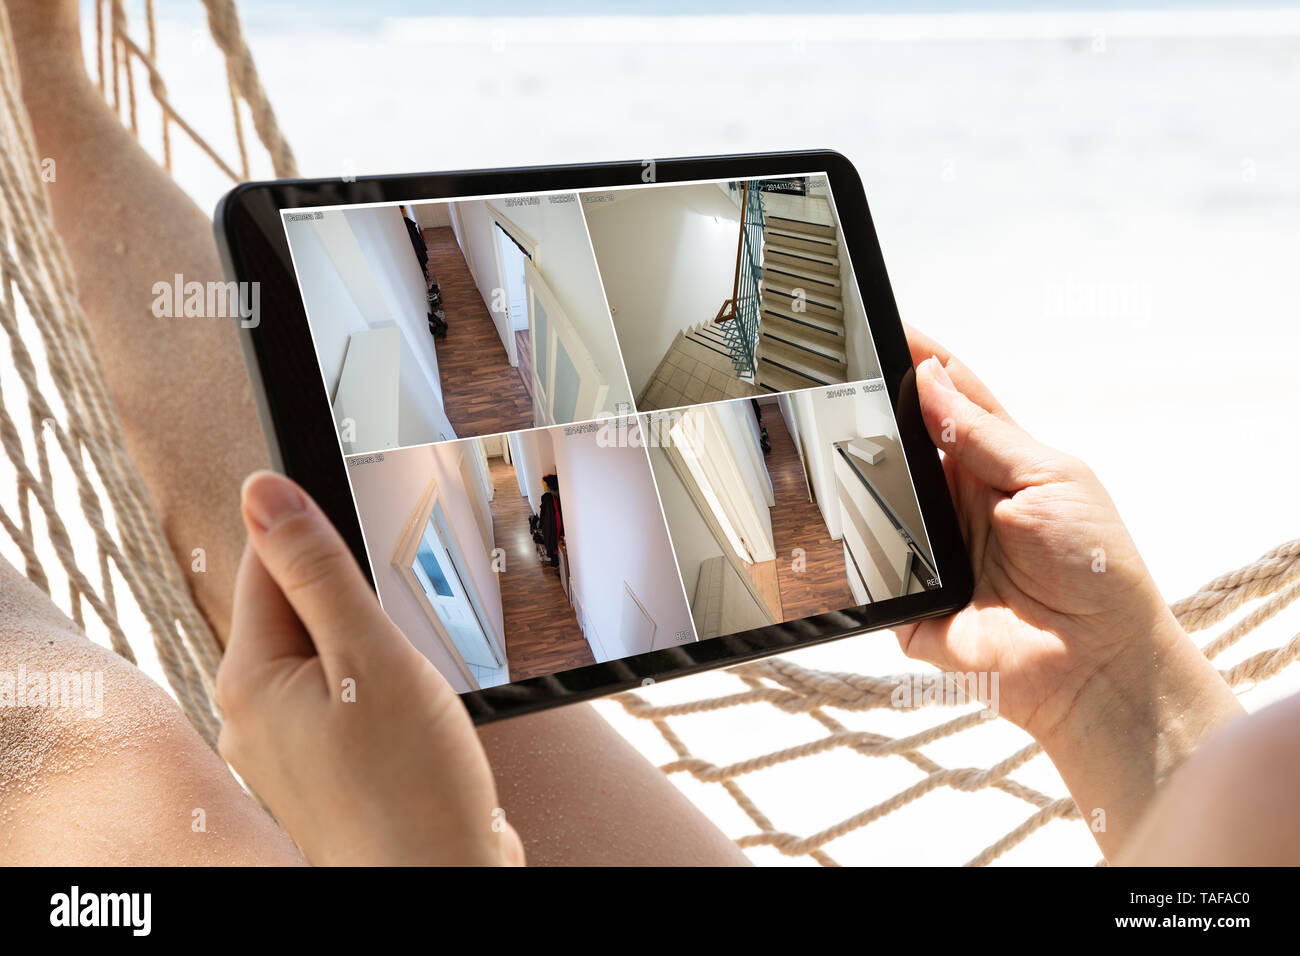 Woman Lying On Hammock Looking At Monitoring Cameras. Live View On The Digital Tablet At Beach Stock Photo